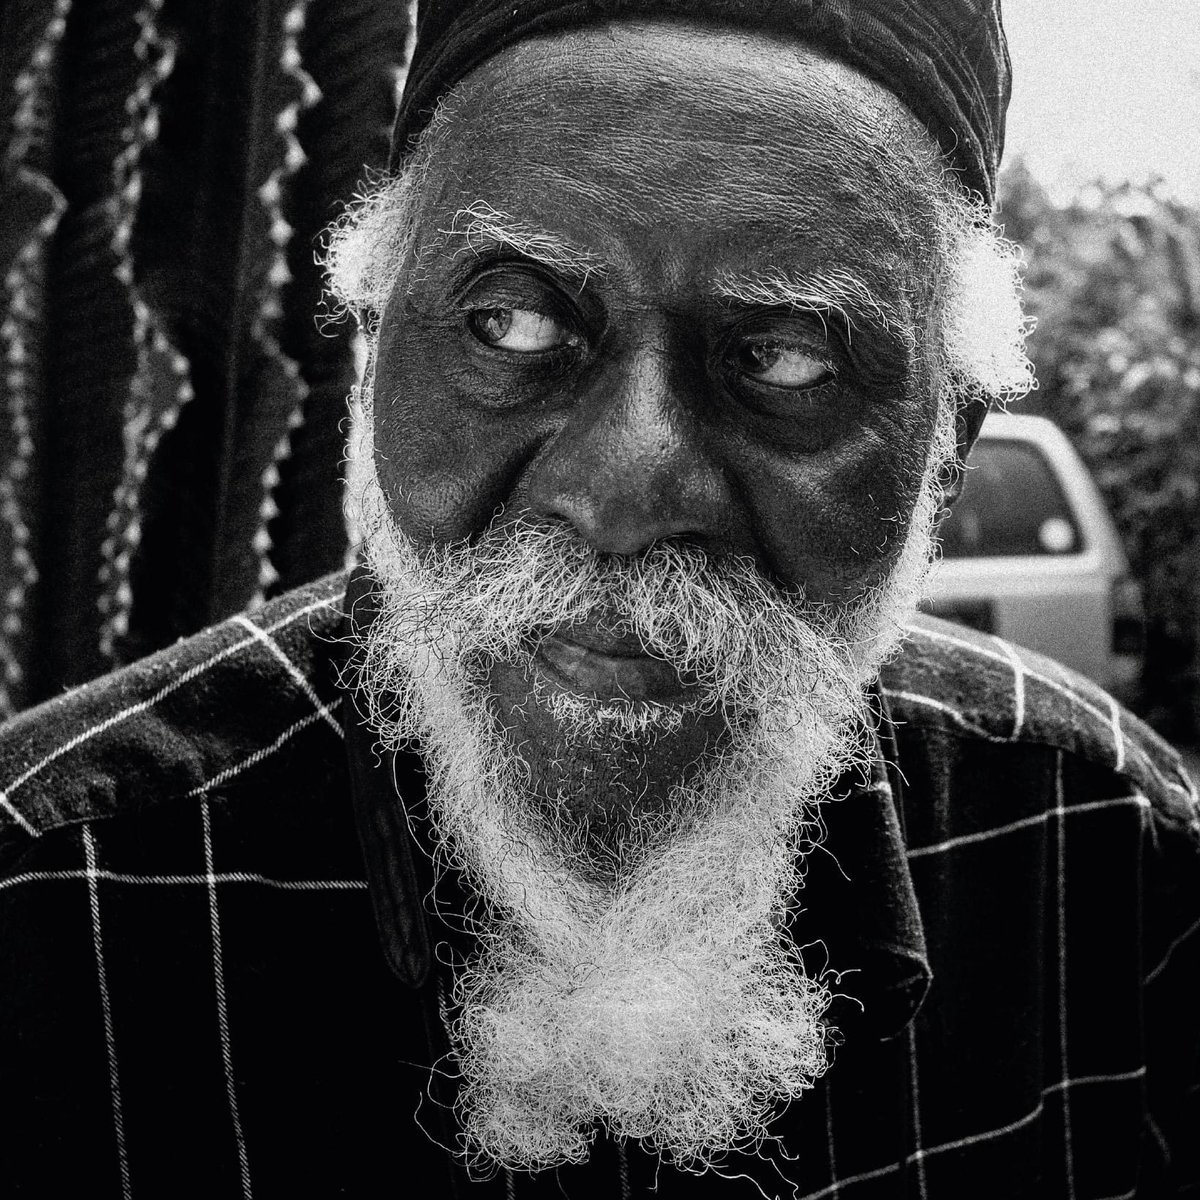 We are devastated to share that Pharoah Sanders has passed away. He died peacefully surrounded by loving family and friends in Los Angeles earlier this morning. Always and forever the most beautiful human being, may he rest in peace. ❤️